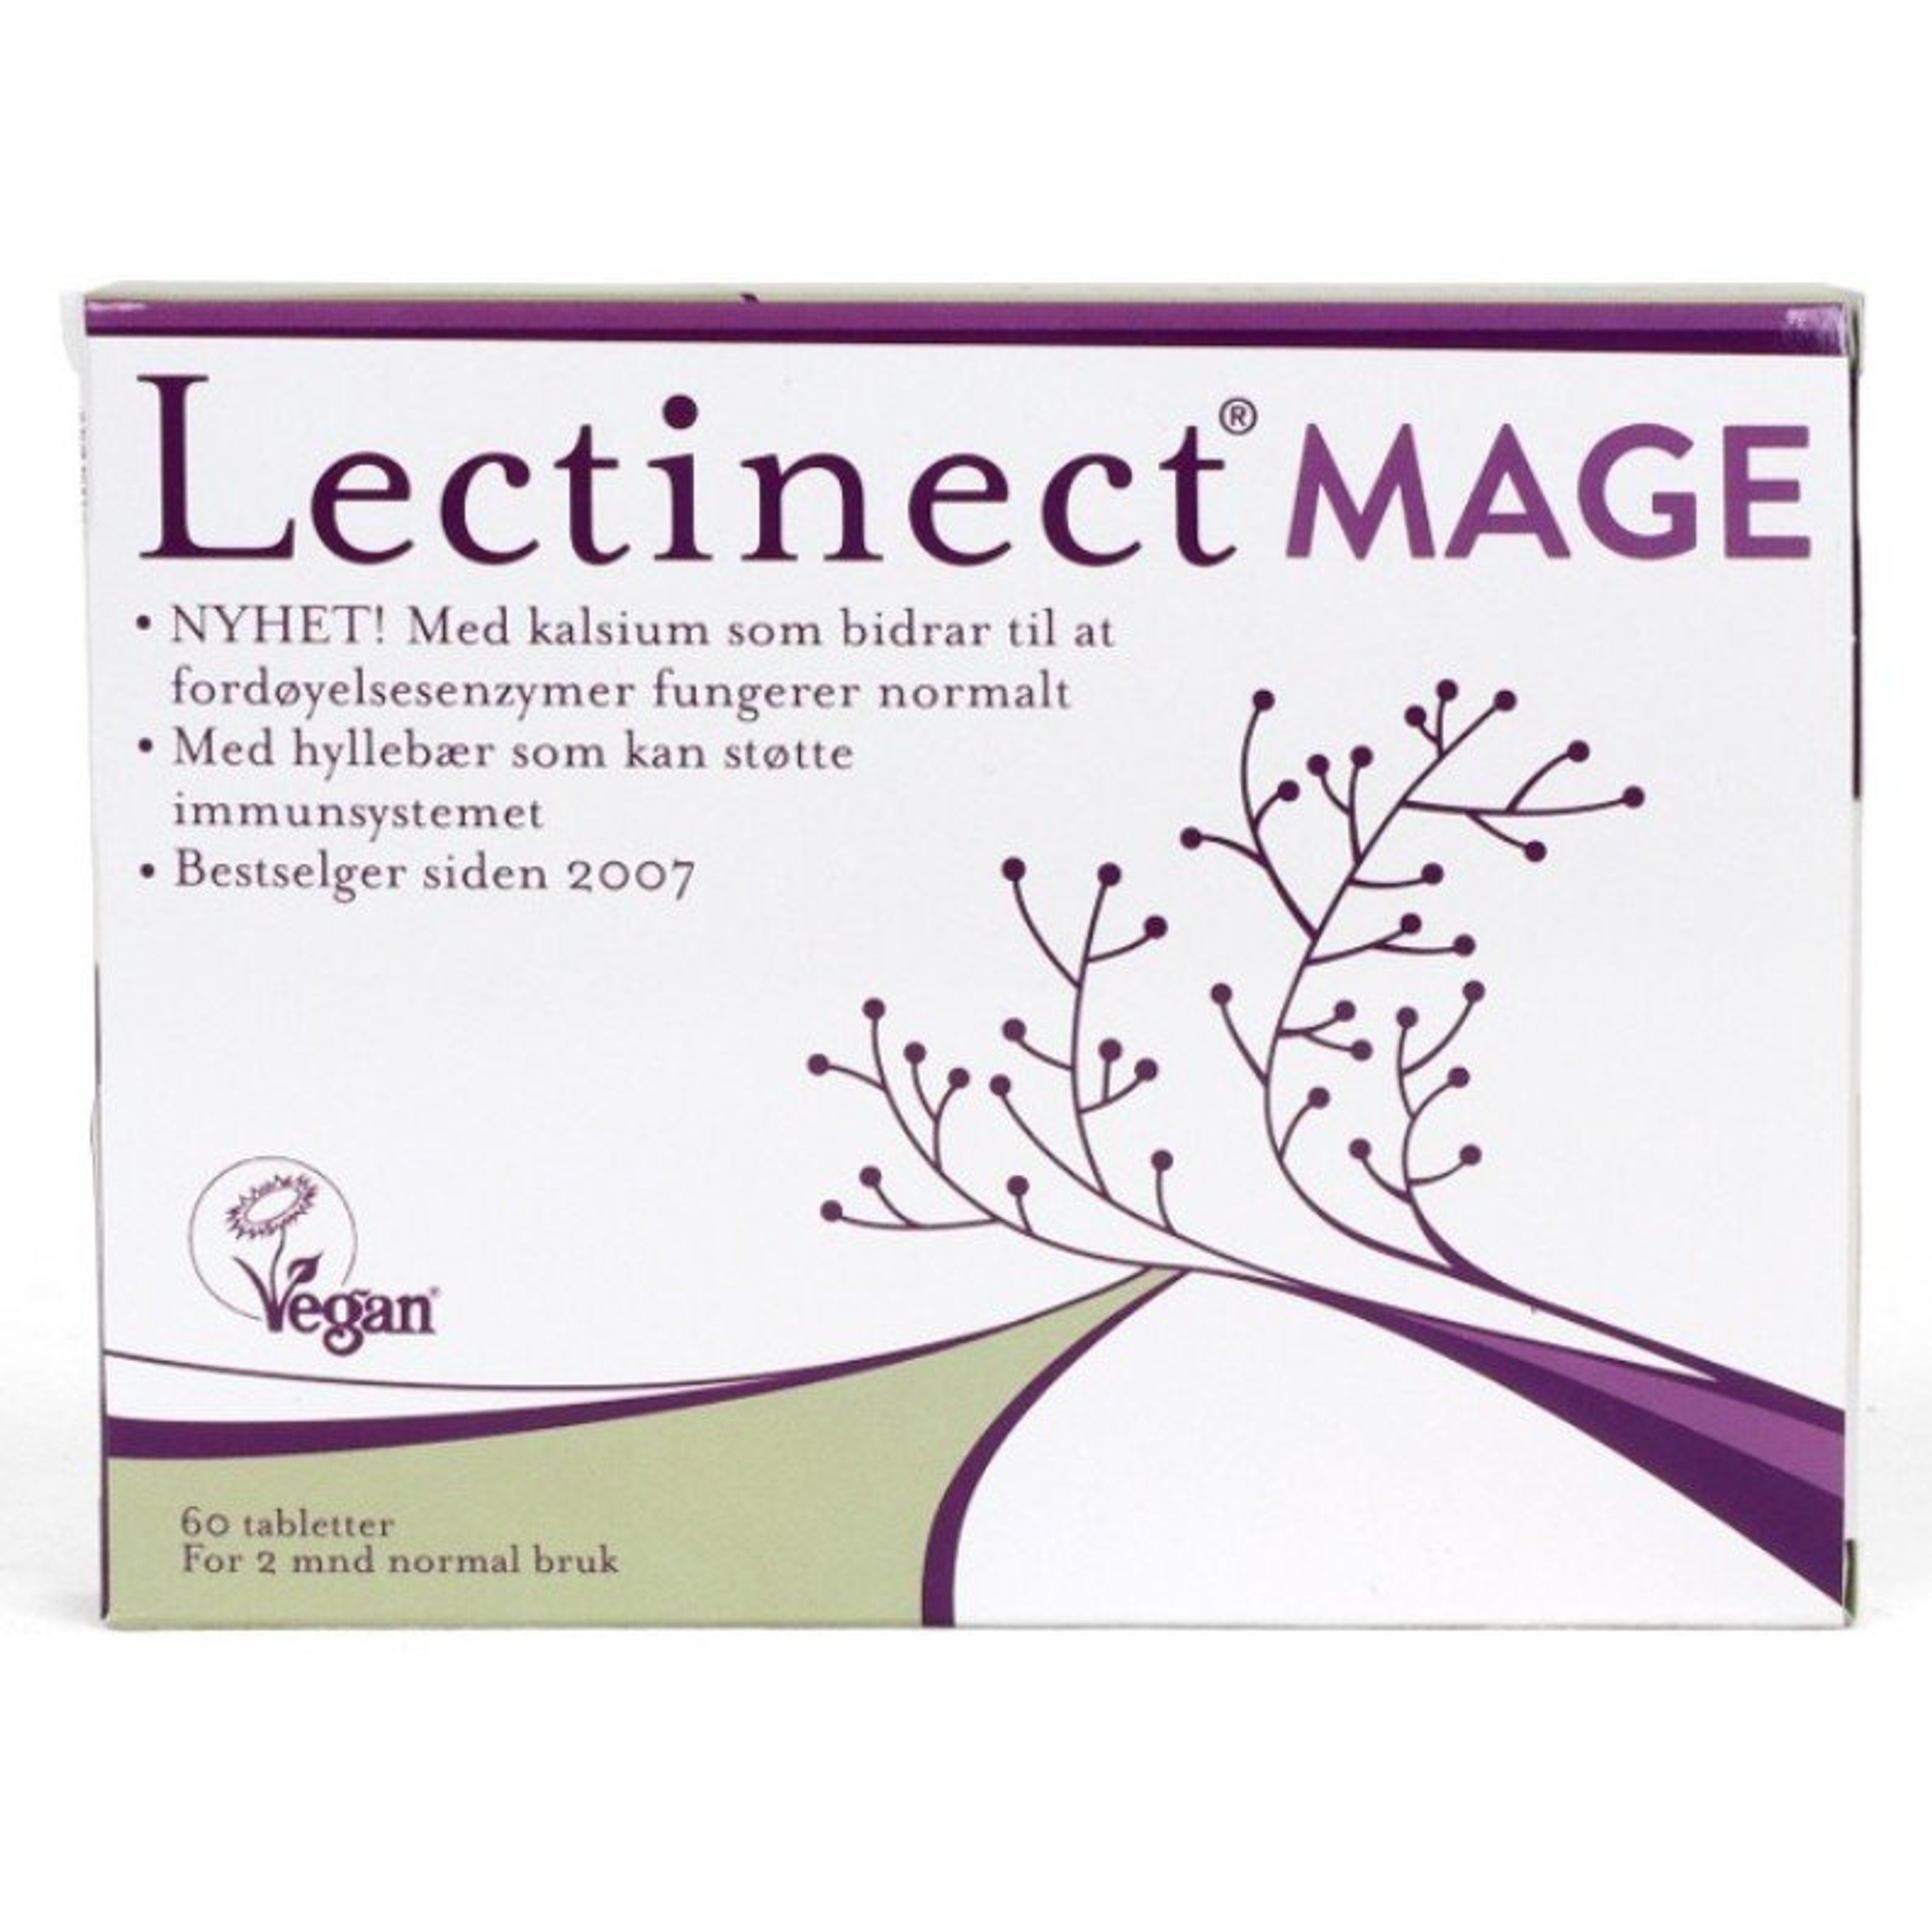 Lectinect Mage 794x7-bwBw-vD1.jpg